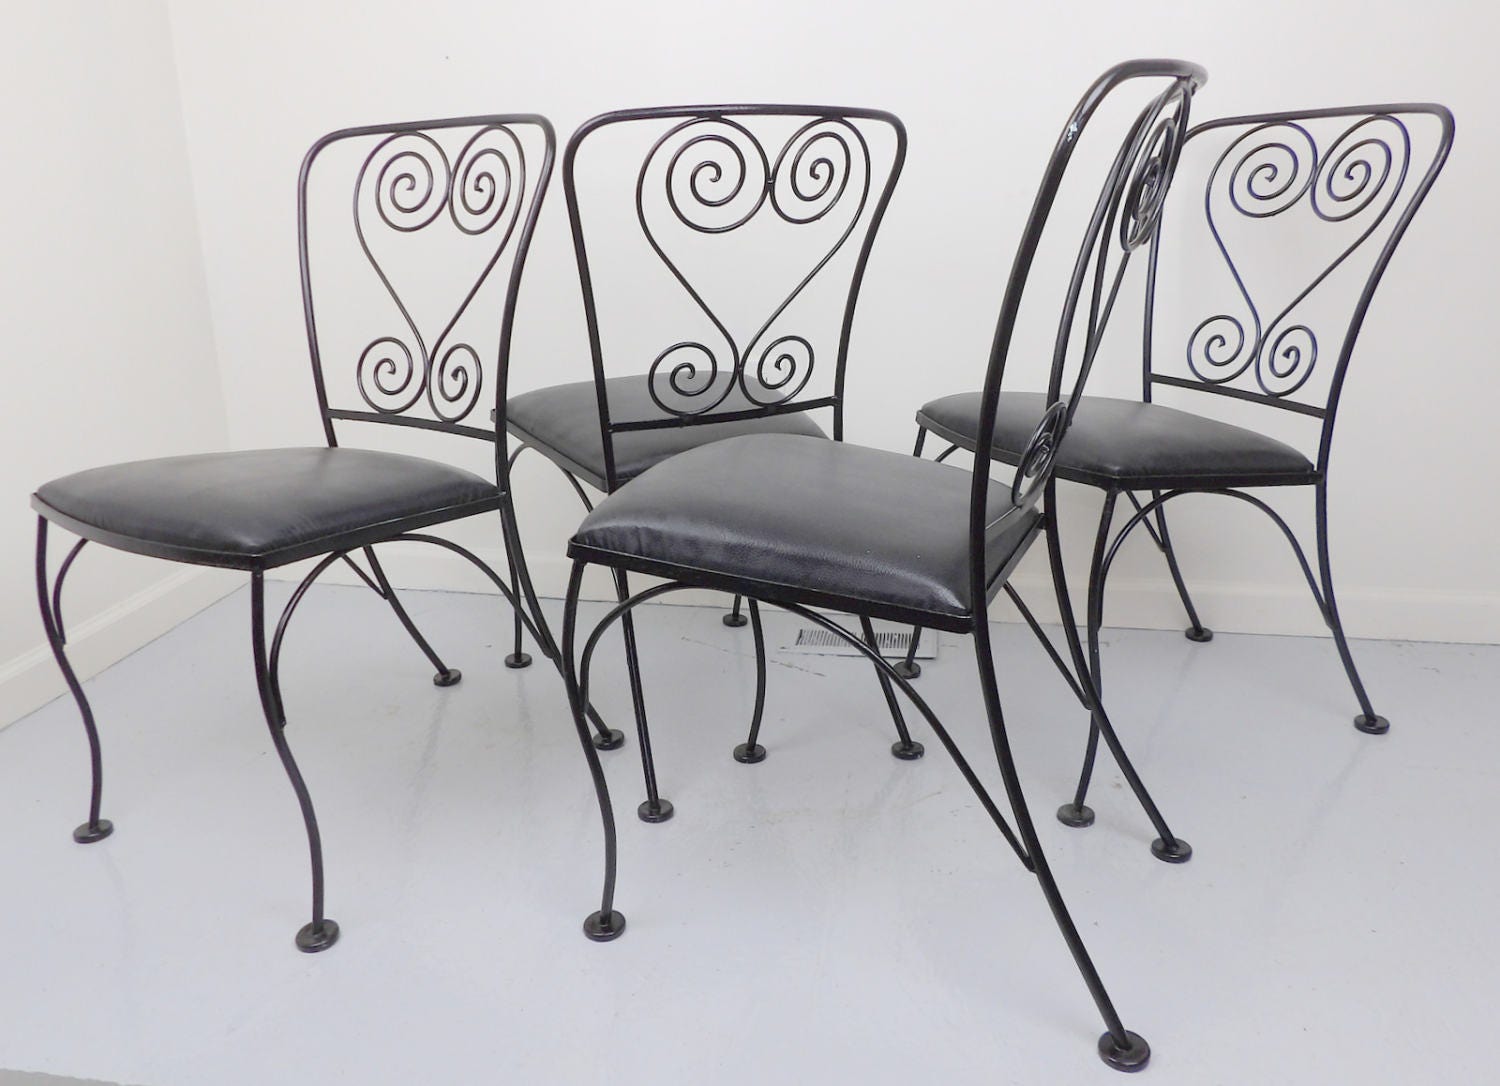 Wrought Iron Chairs 4 Patio Antique Chair Set Metal Black